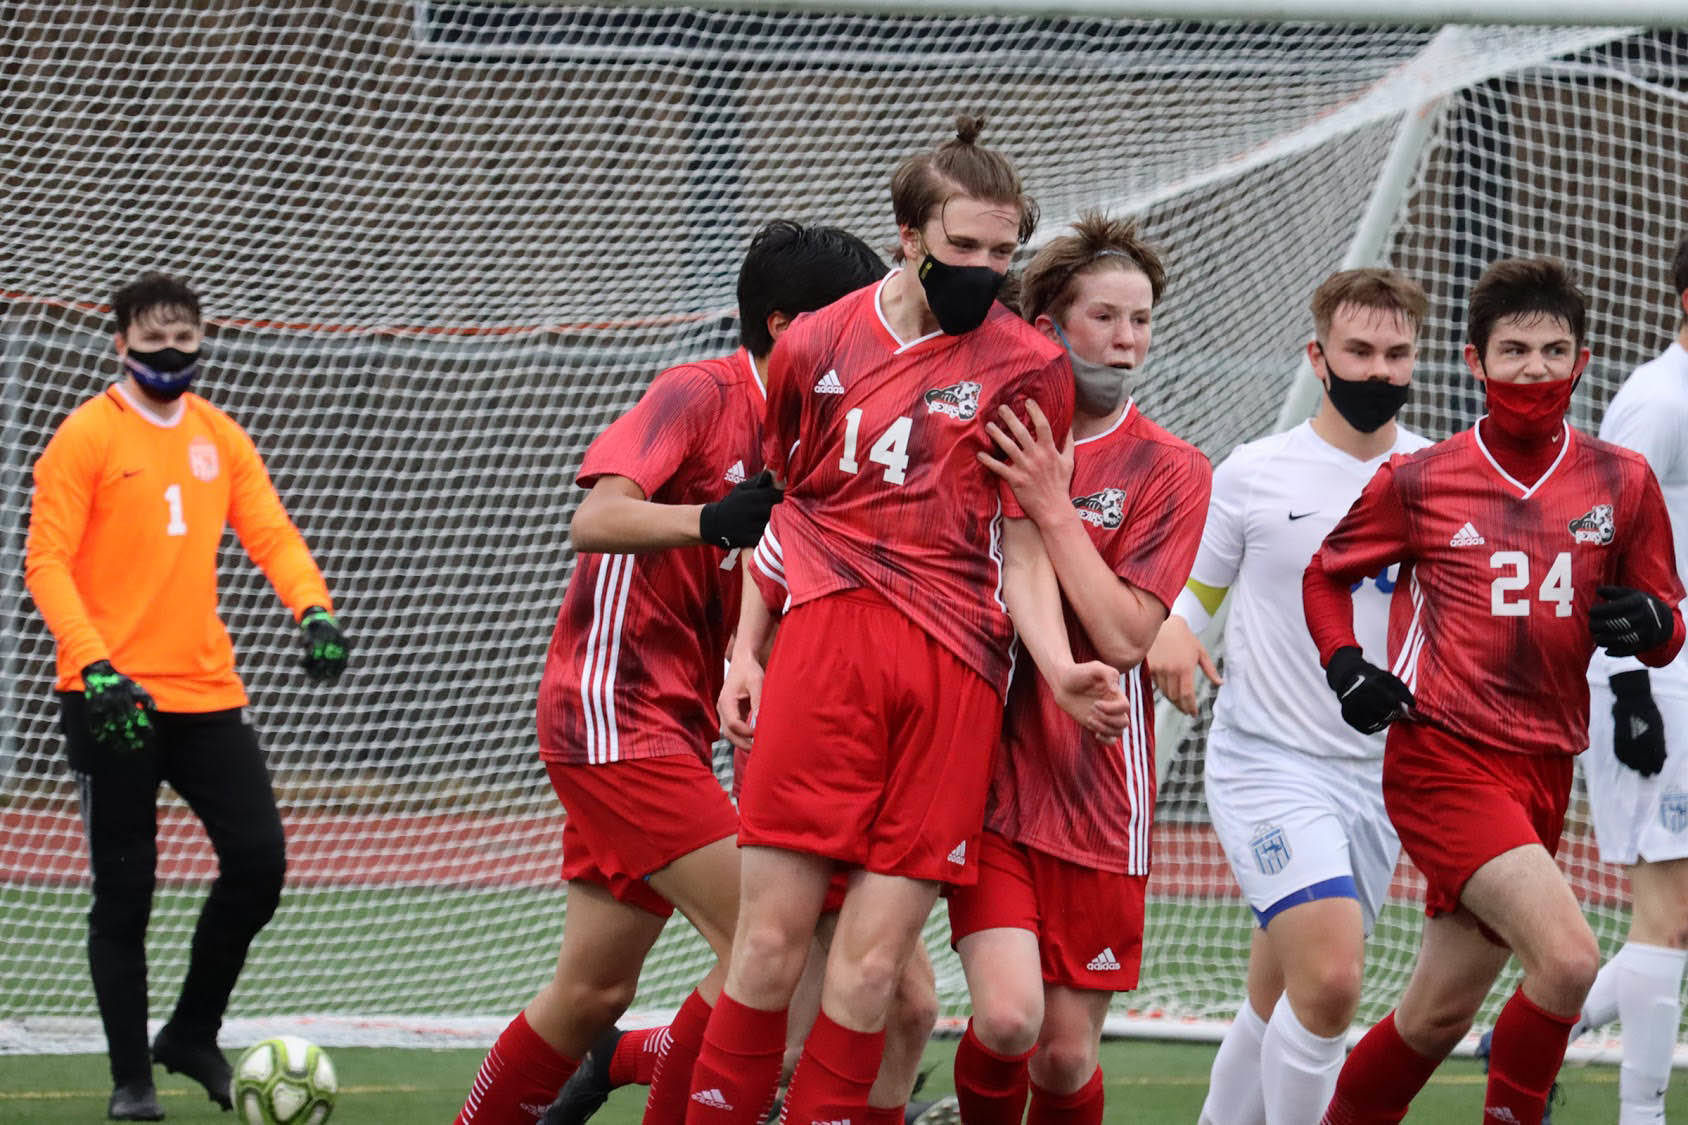 Members of the JDHS boys soccer team help junior Callan Smith celebrate a goal in the season opener against TMHS Tuesday night. In the end, TMHS walked away with a 3-2 victory. (Ben Hohenstatt/Juneau Empire)